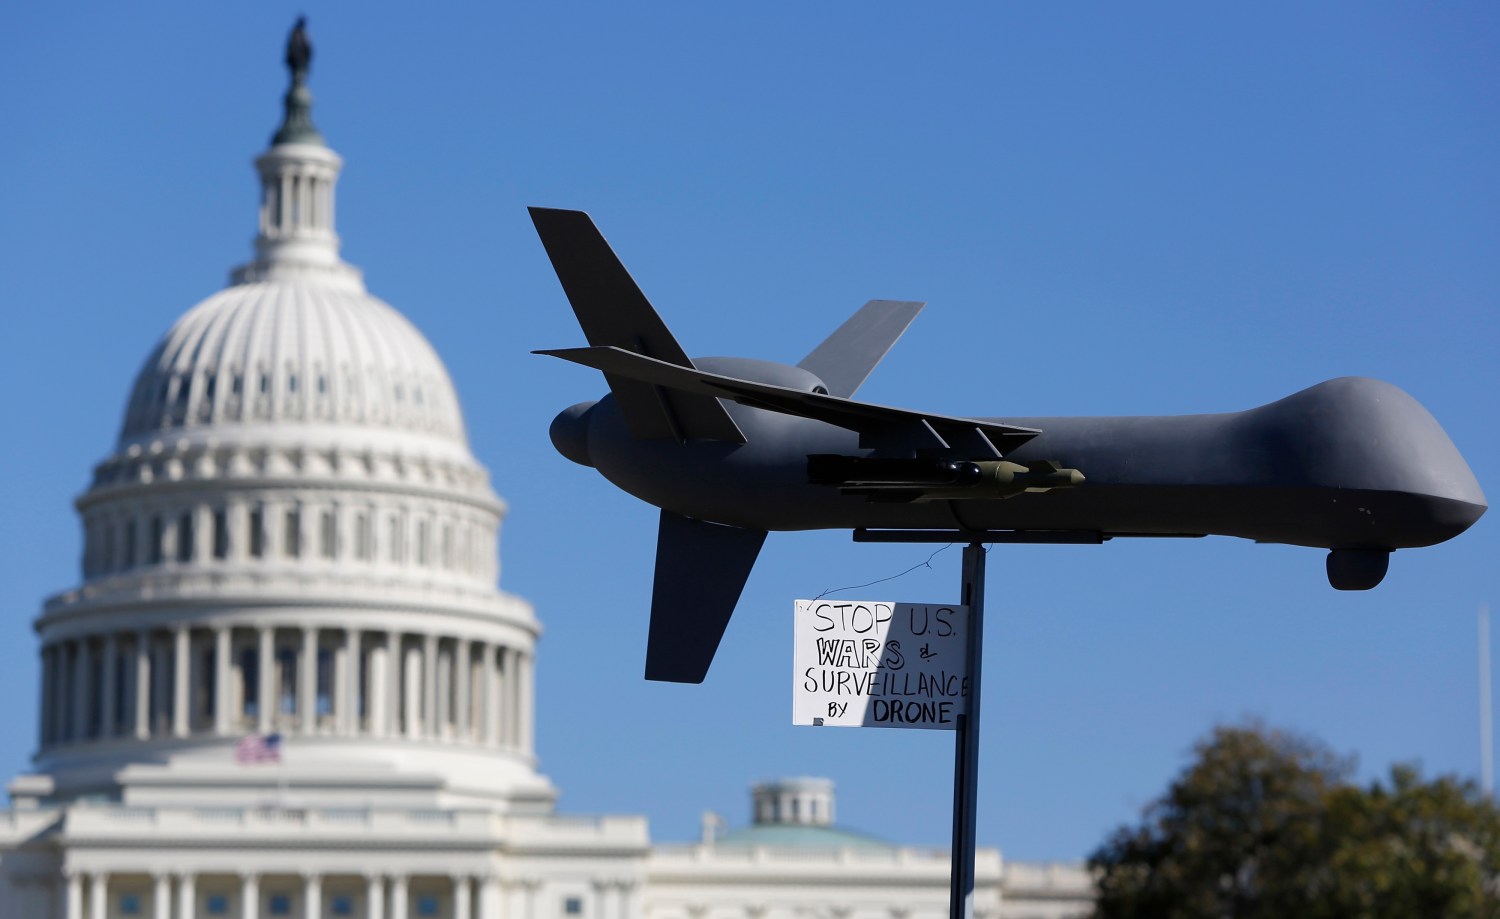 Reuters/Jonathan Ernst - Demonstrators deploy a model of a U.S. drone aircraft at the "Stop Watching Us: A Rally Against Mass Surveillance" near the U.S. Capitol in Washington, October 26, 2013